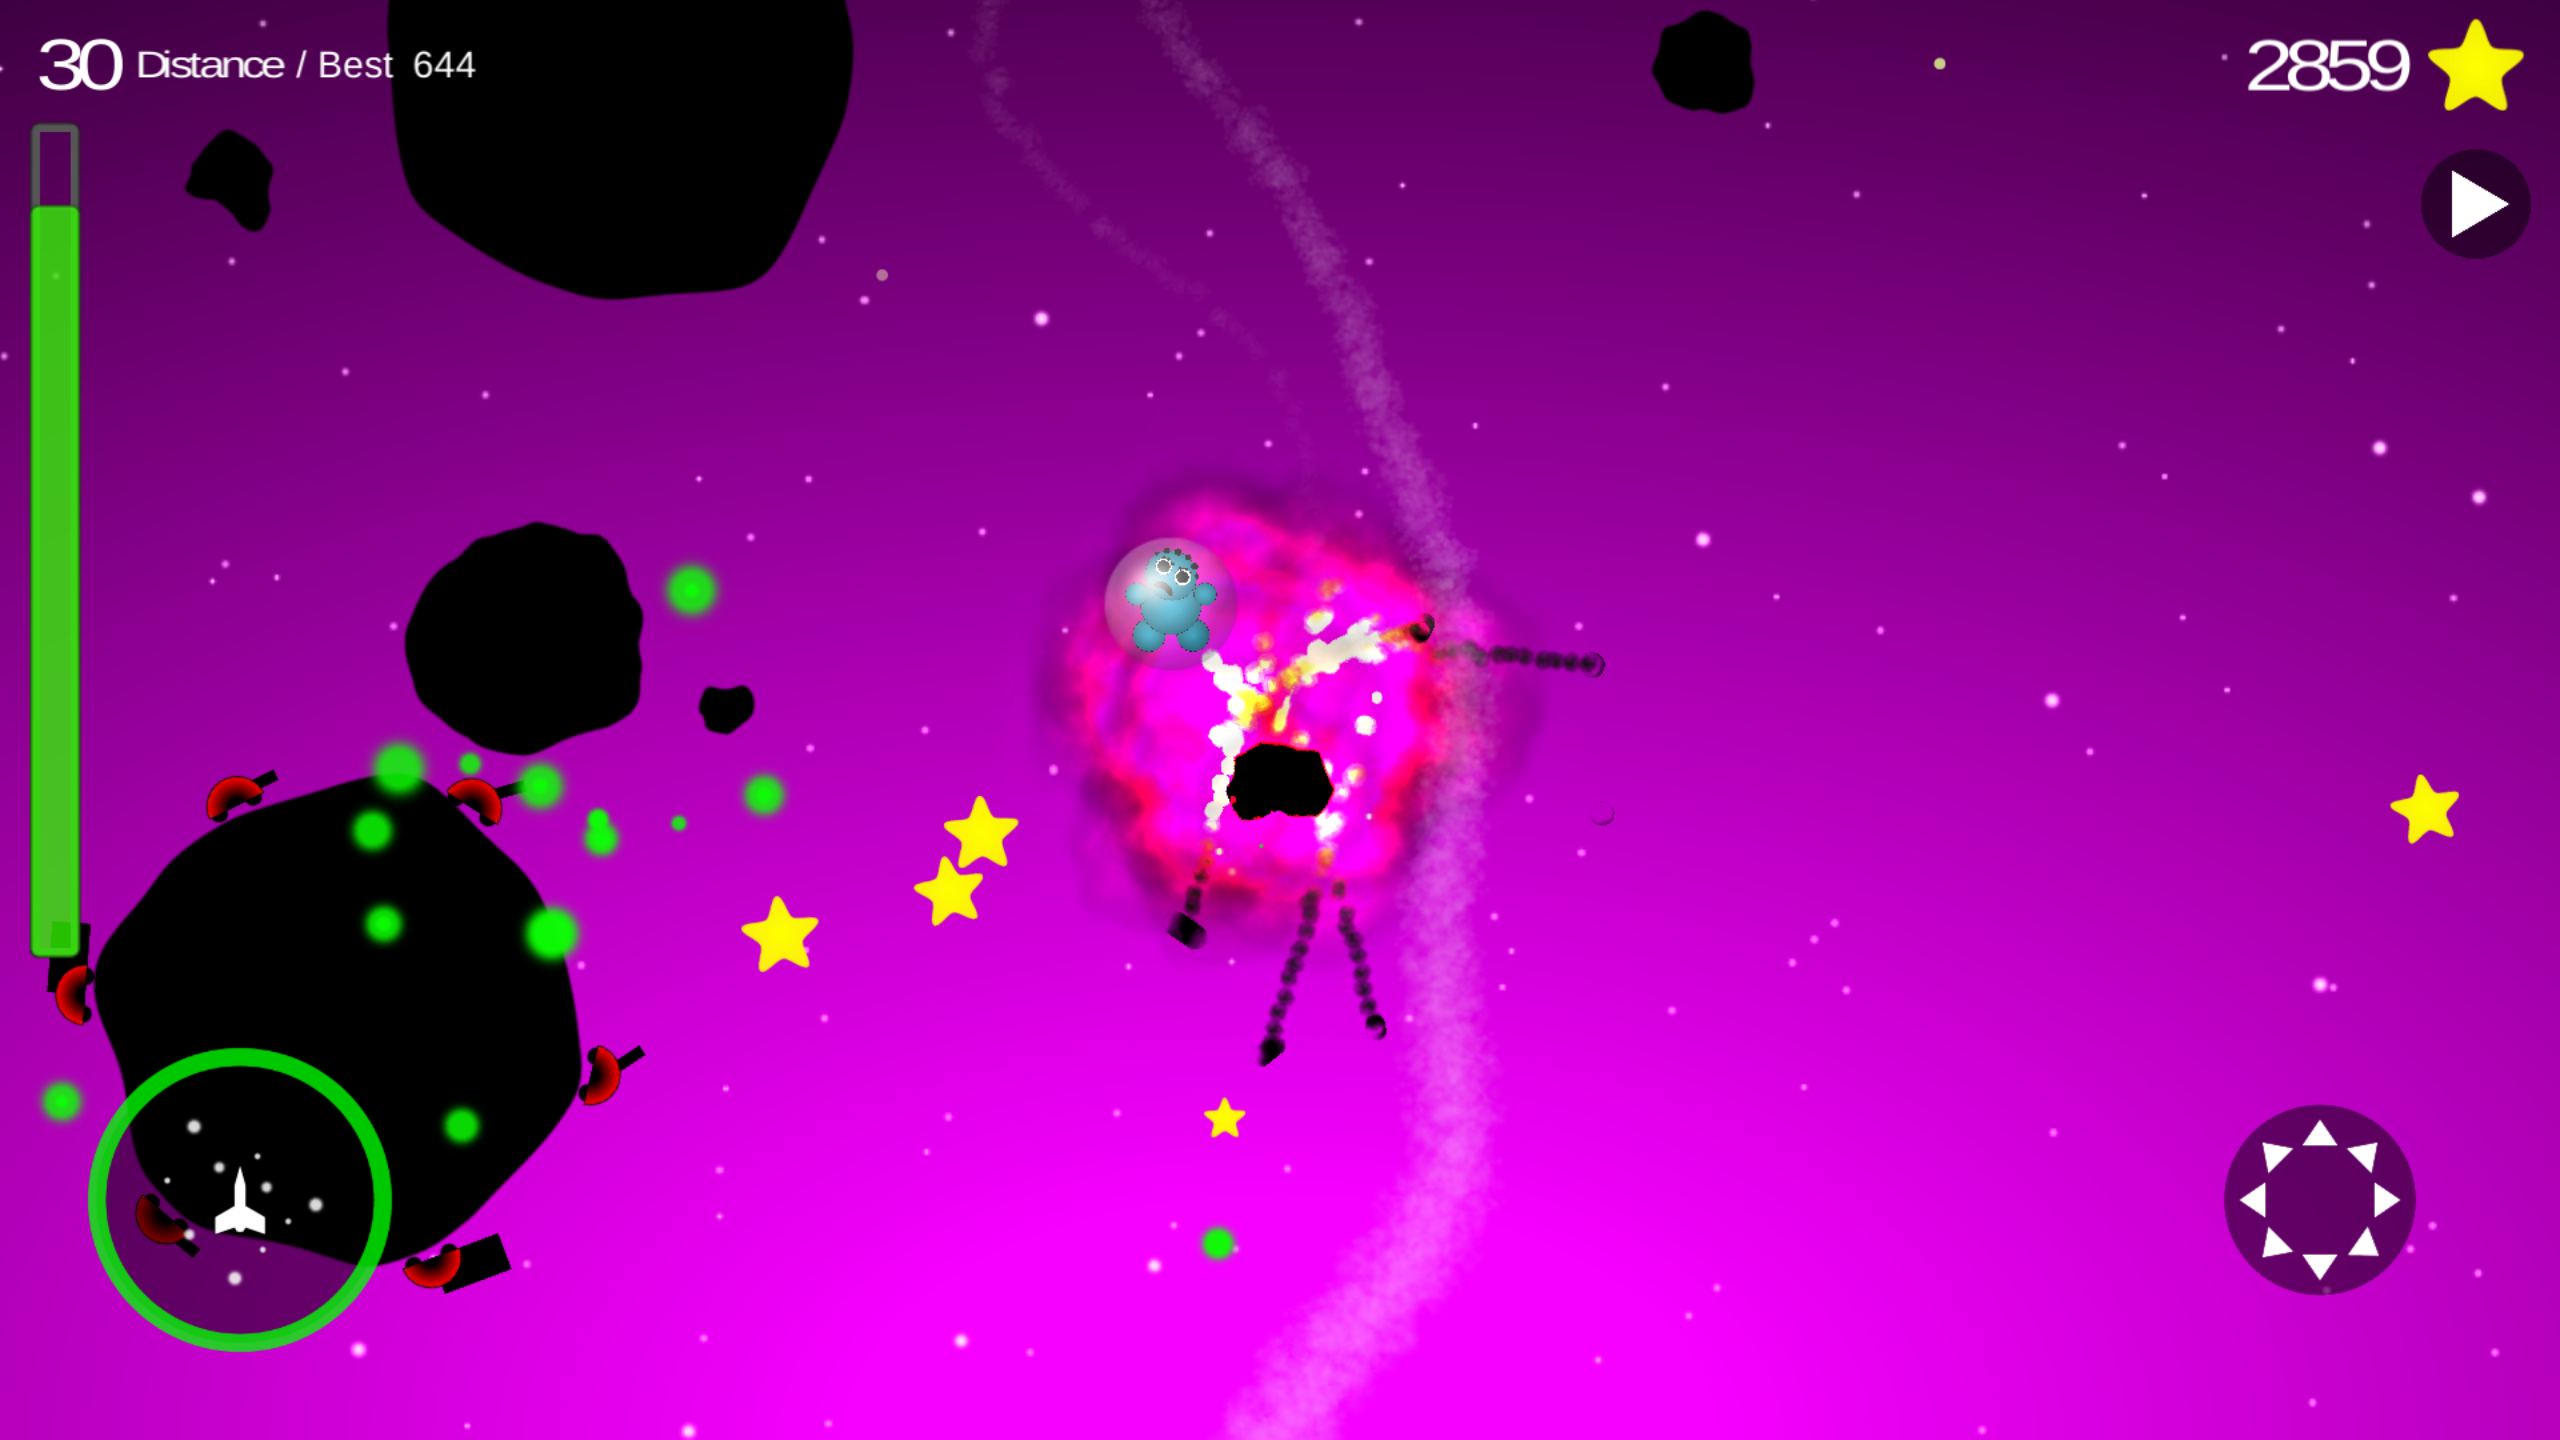 Humanoid ran into an asteroid riding his space rocket against a pink background.